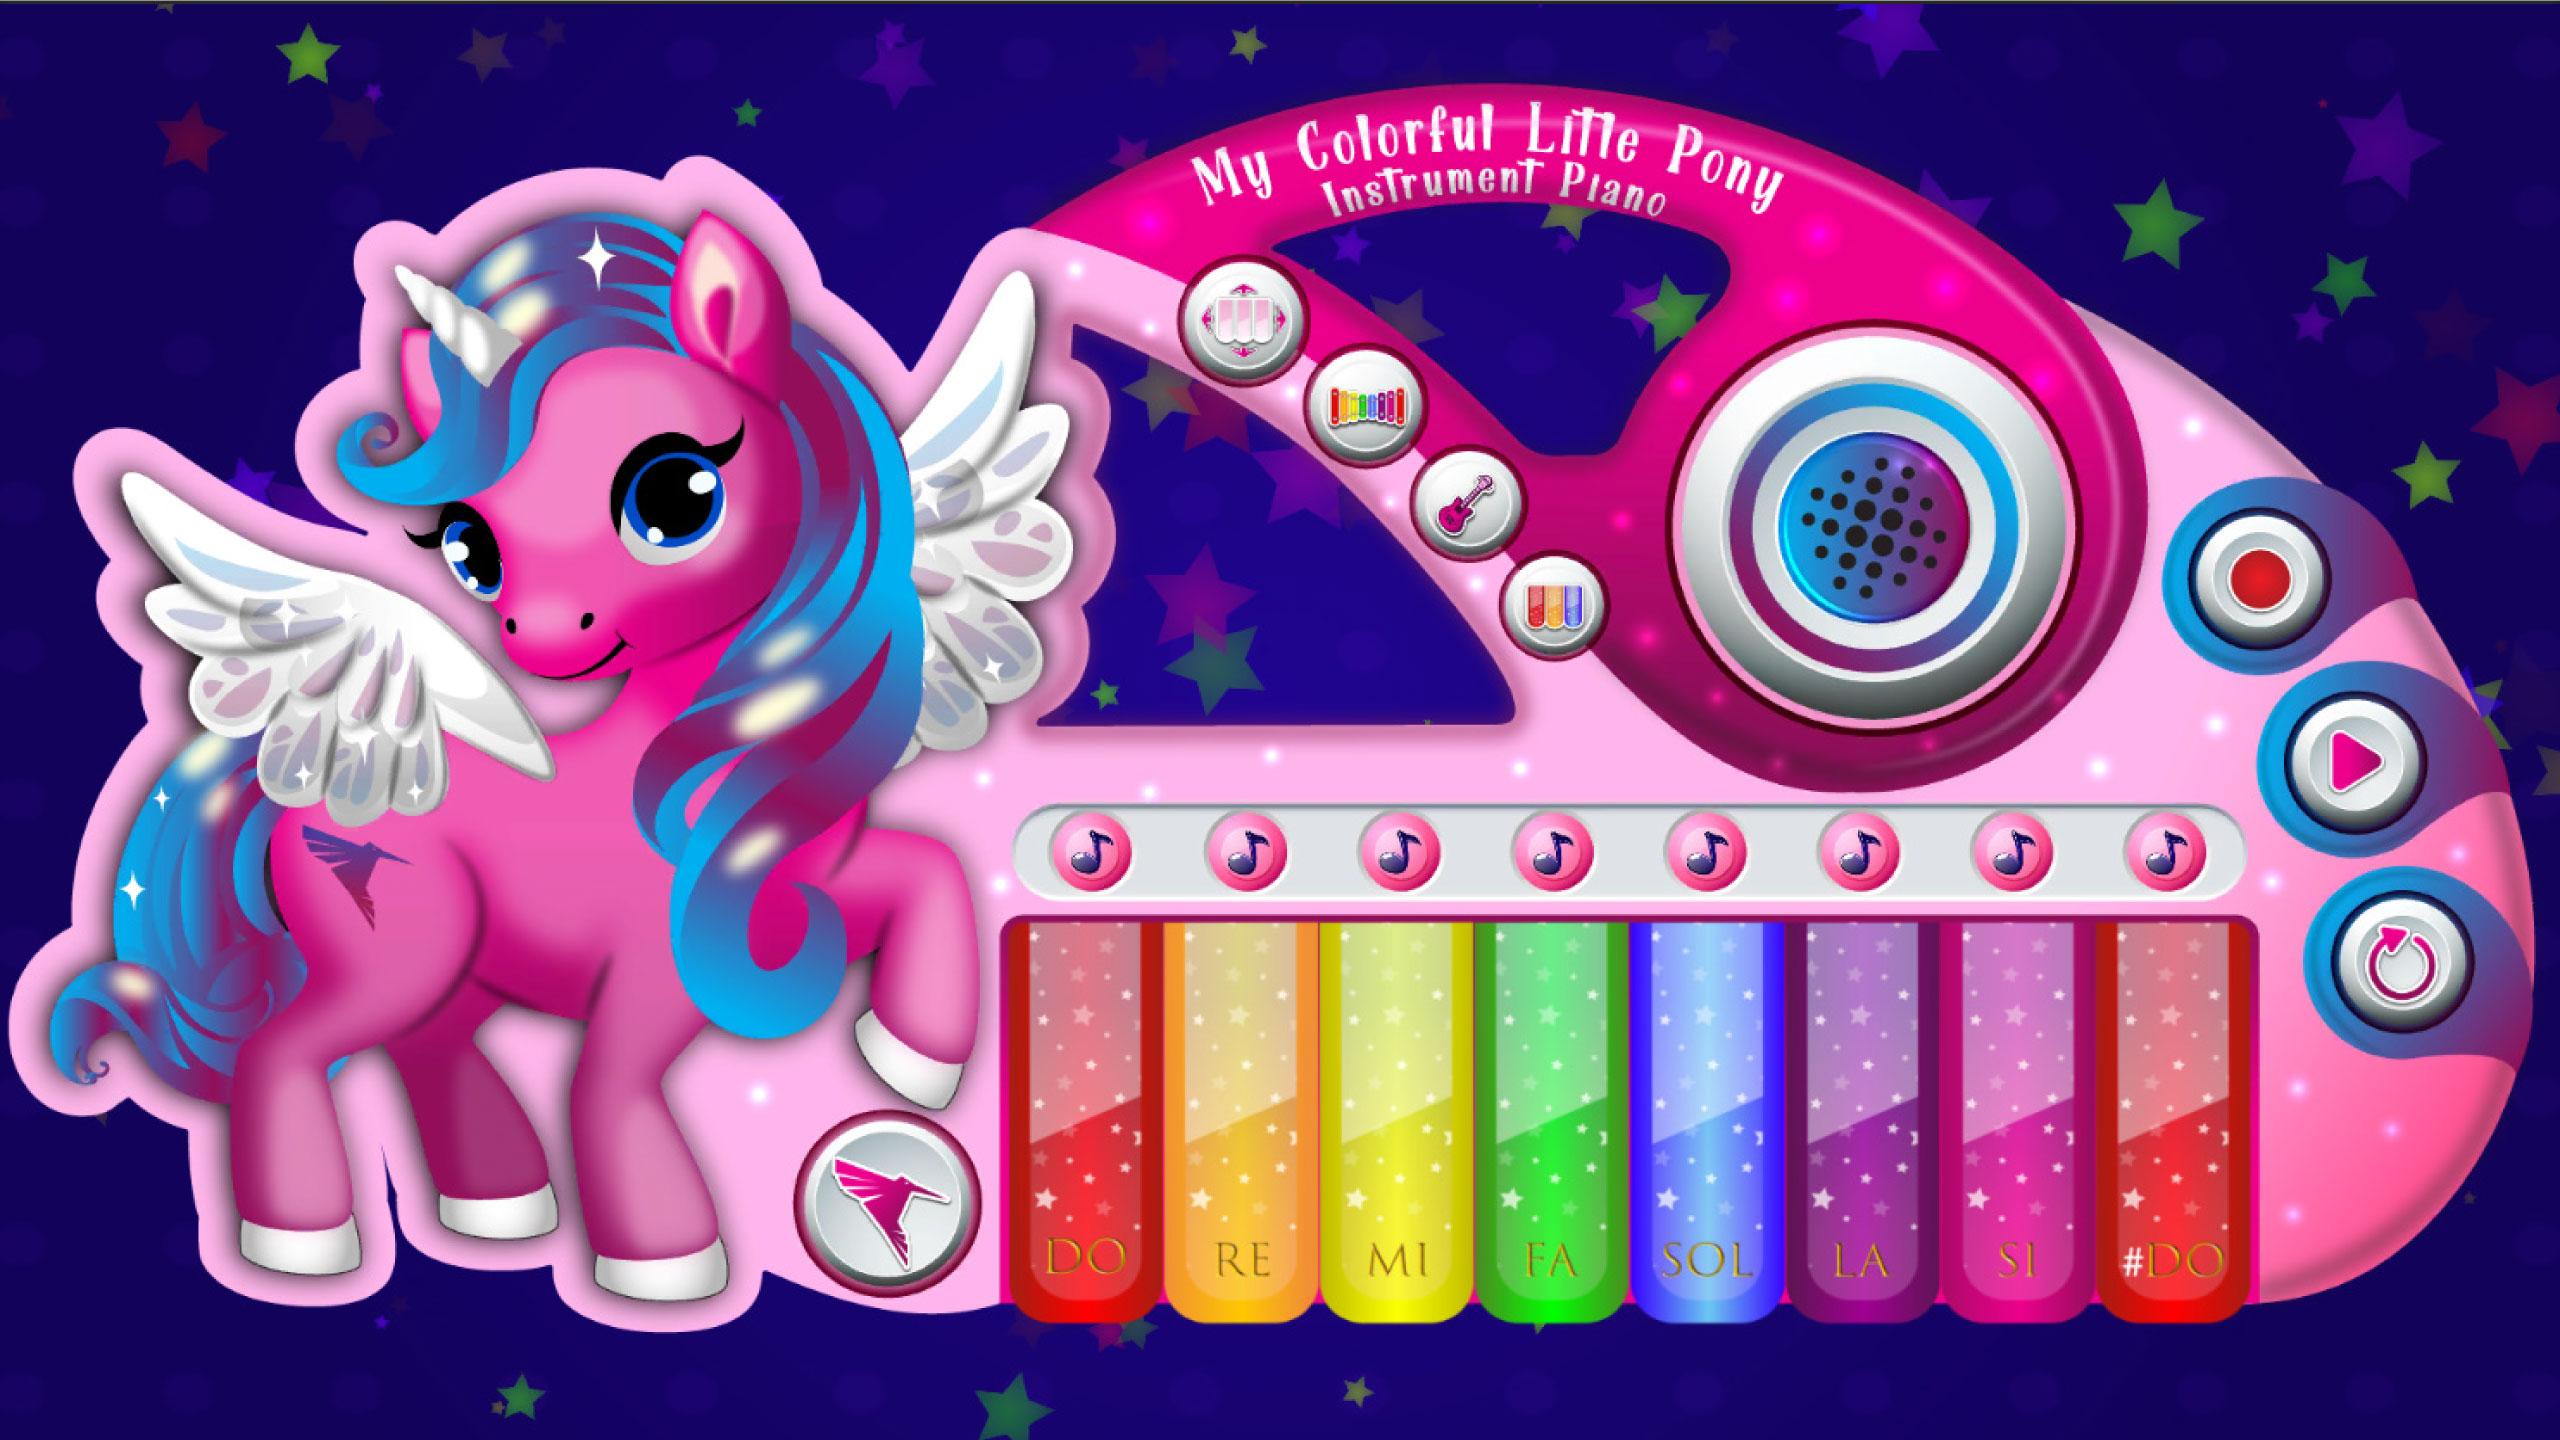 My Colorful Litle Pony Instrument - Piano 2.0 Screenshot 21